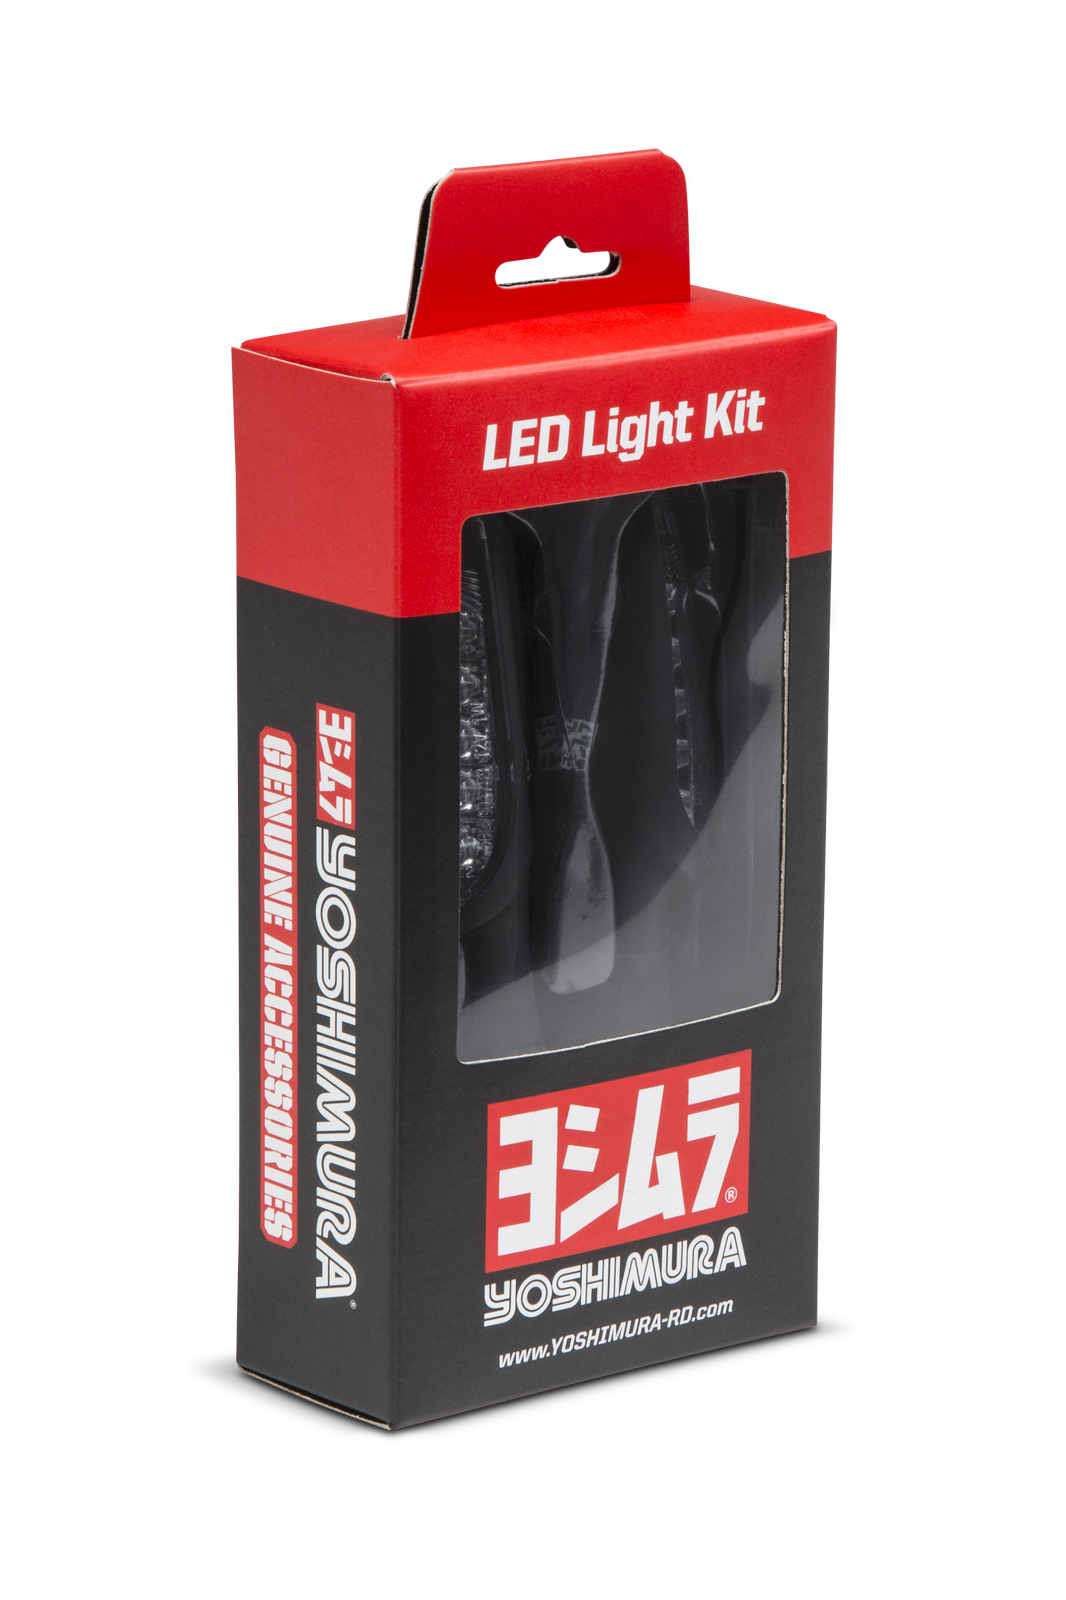 The Yoshimura LED front light kit fits most 2 wire applications